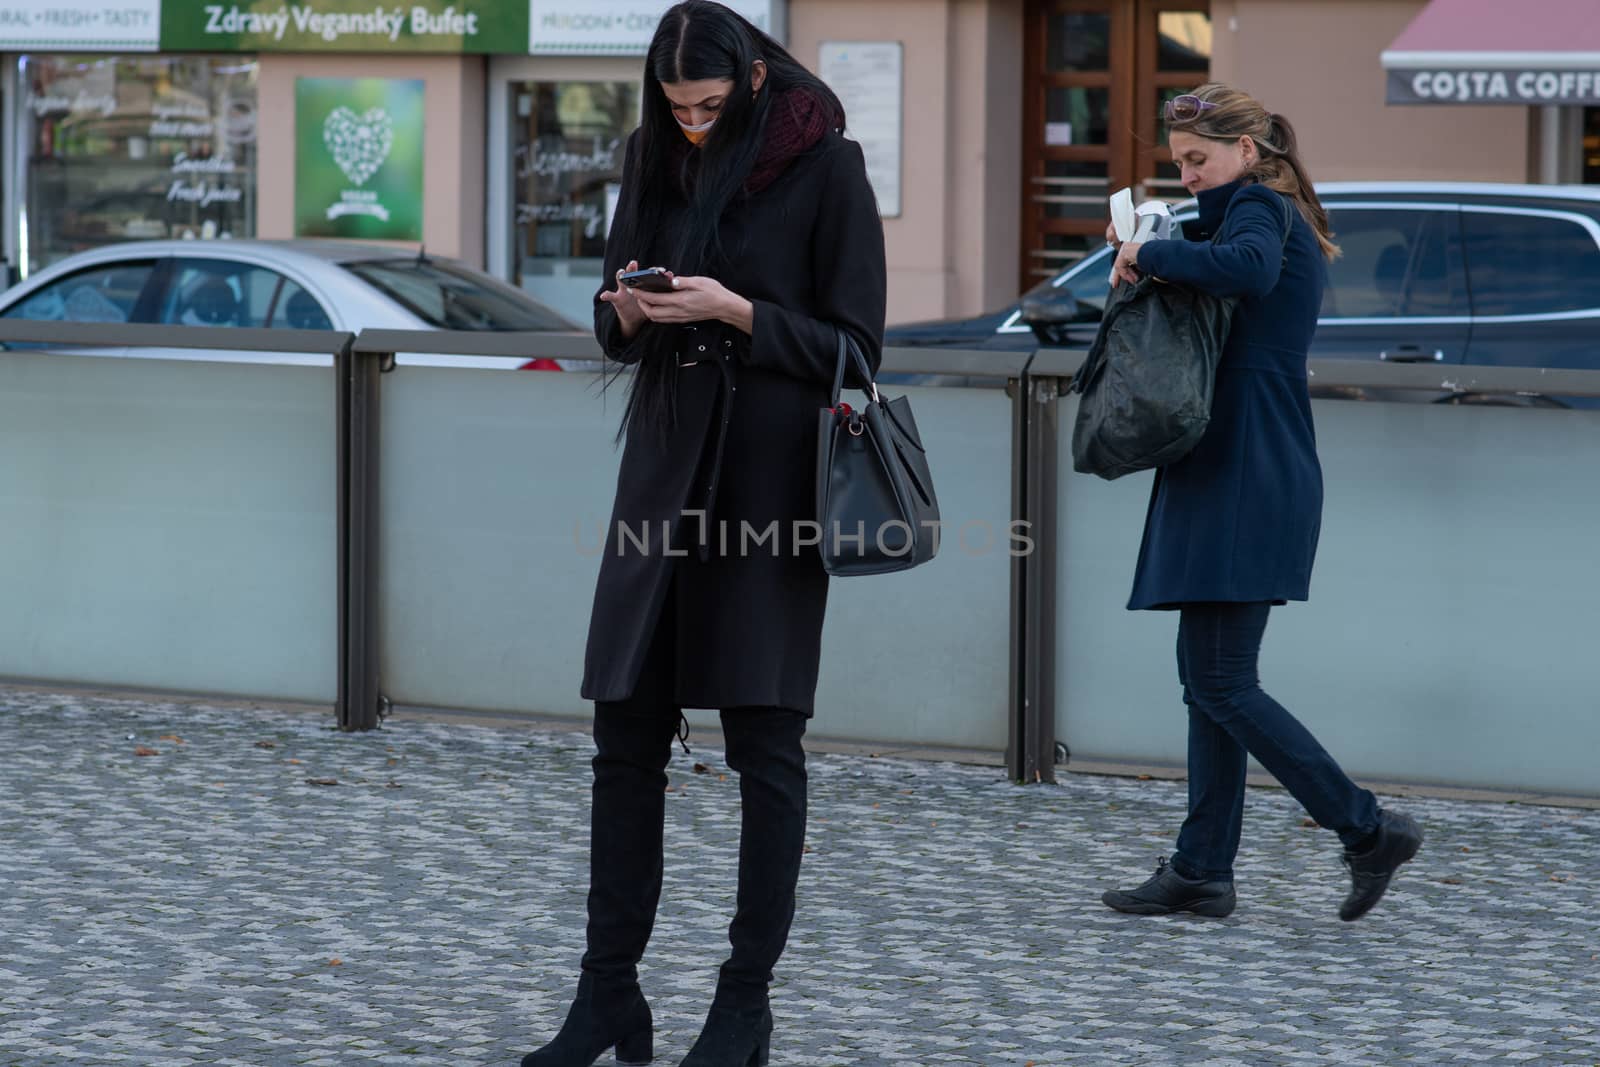 11/16/2020. Czech Republic. A woman wearing a mask is waiting for a tram at Hradcanska tram stop during quarantine. by gonzalobell